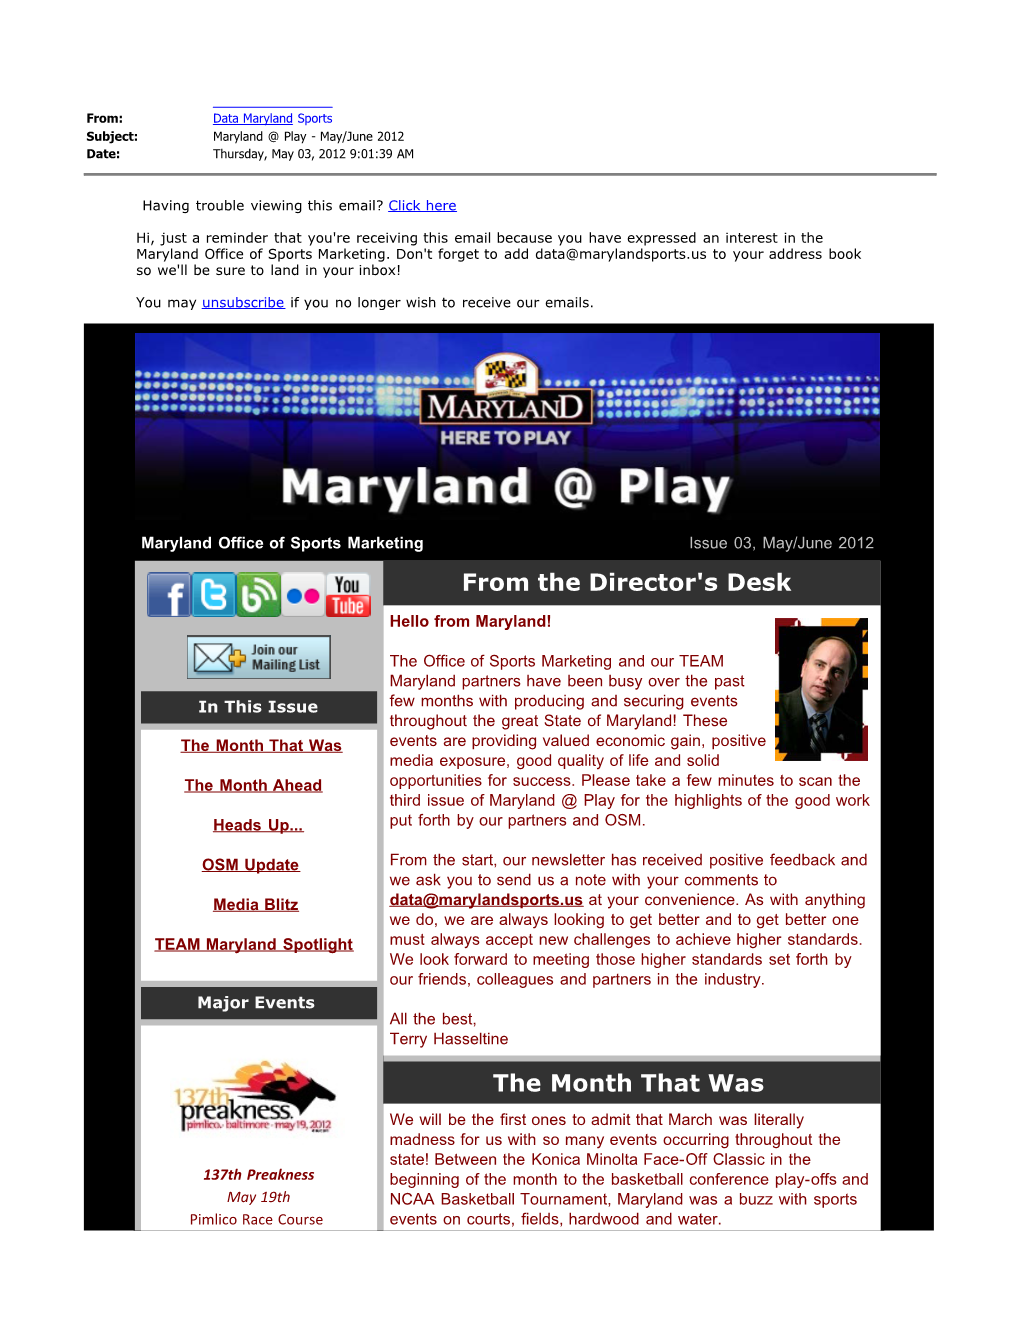 Maryland @ Play - May/June 2012 Date: Thursday, May 03, 2012 9:01:39 AM